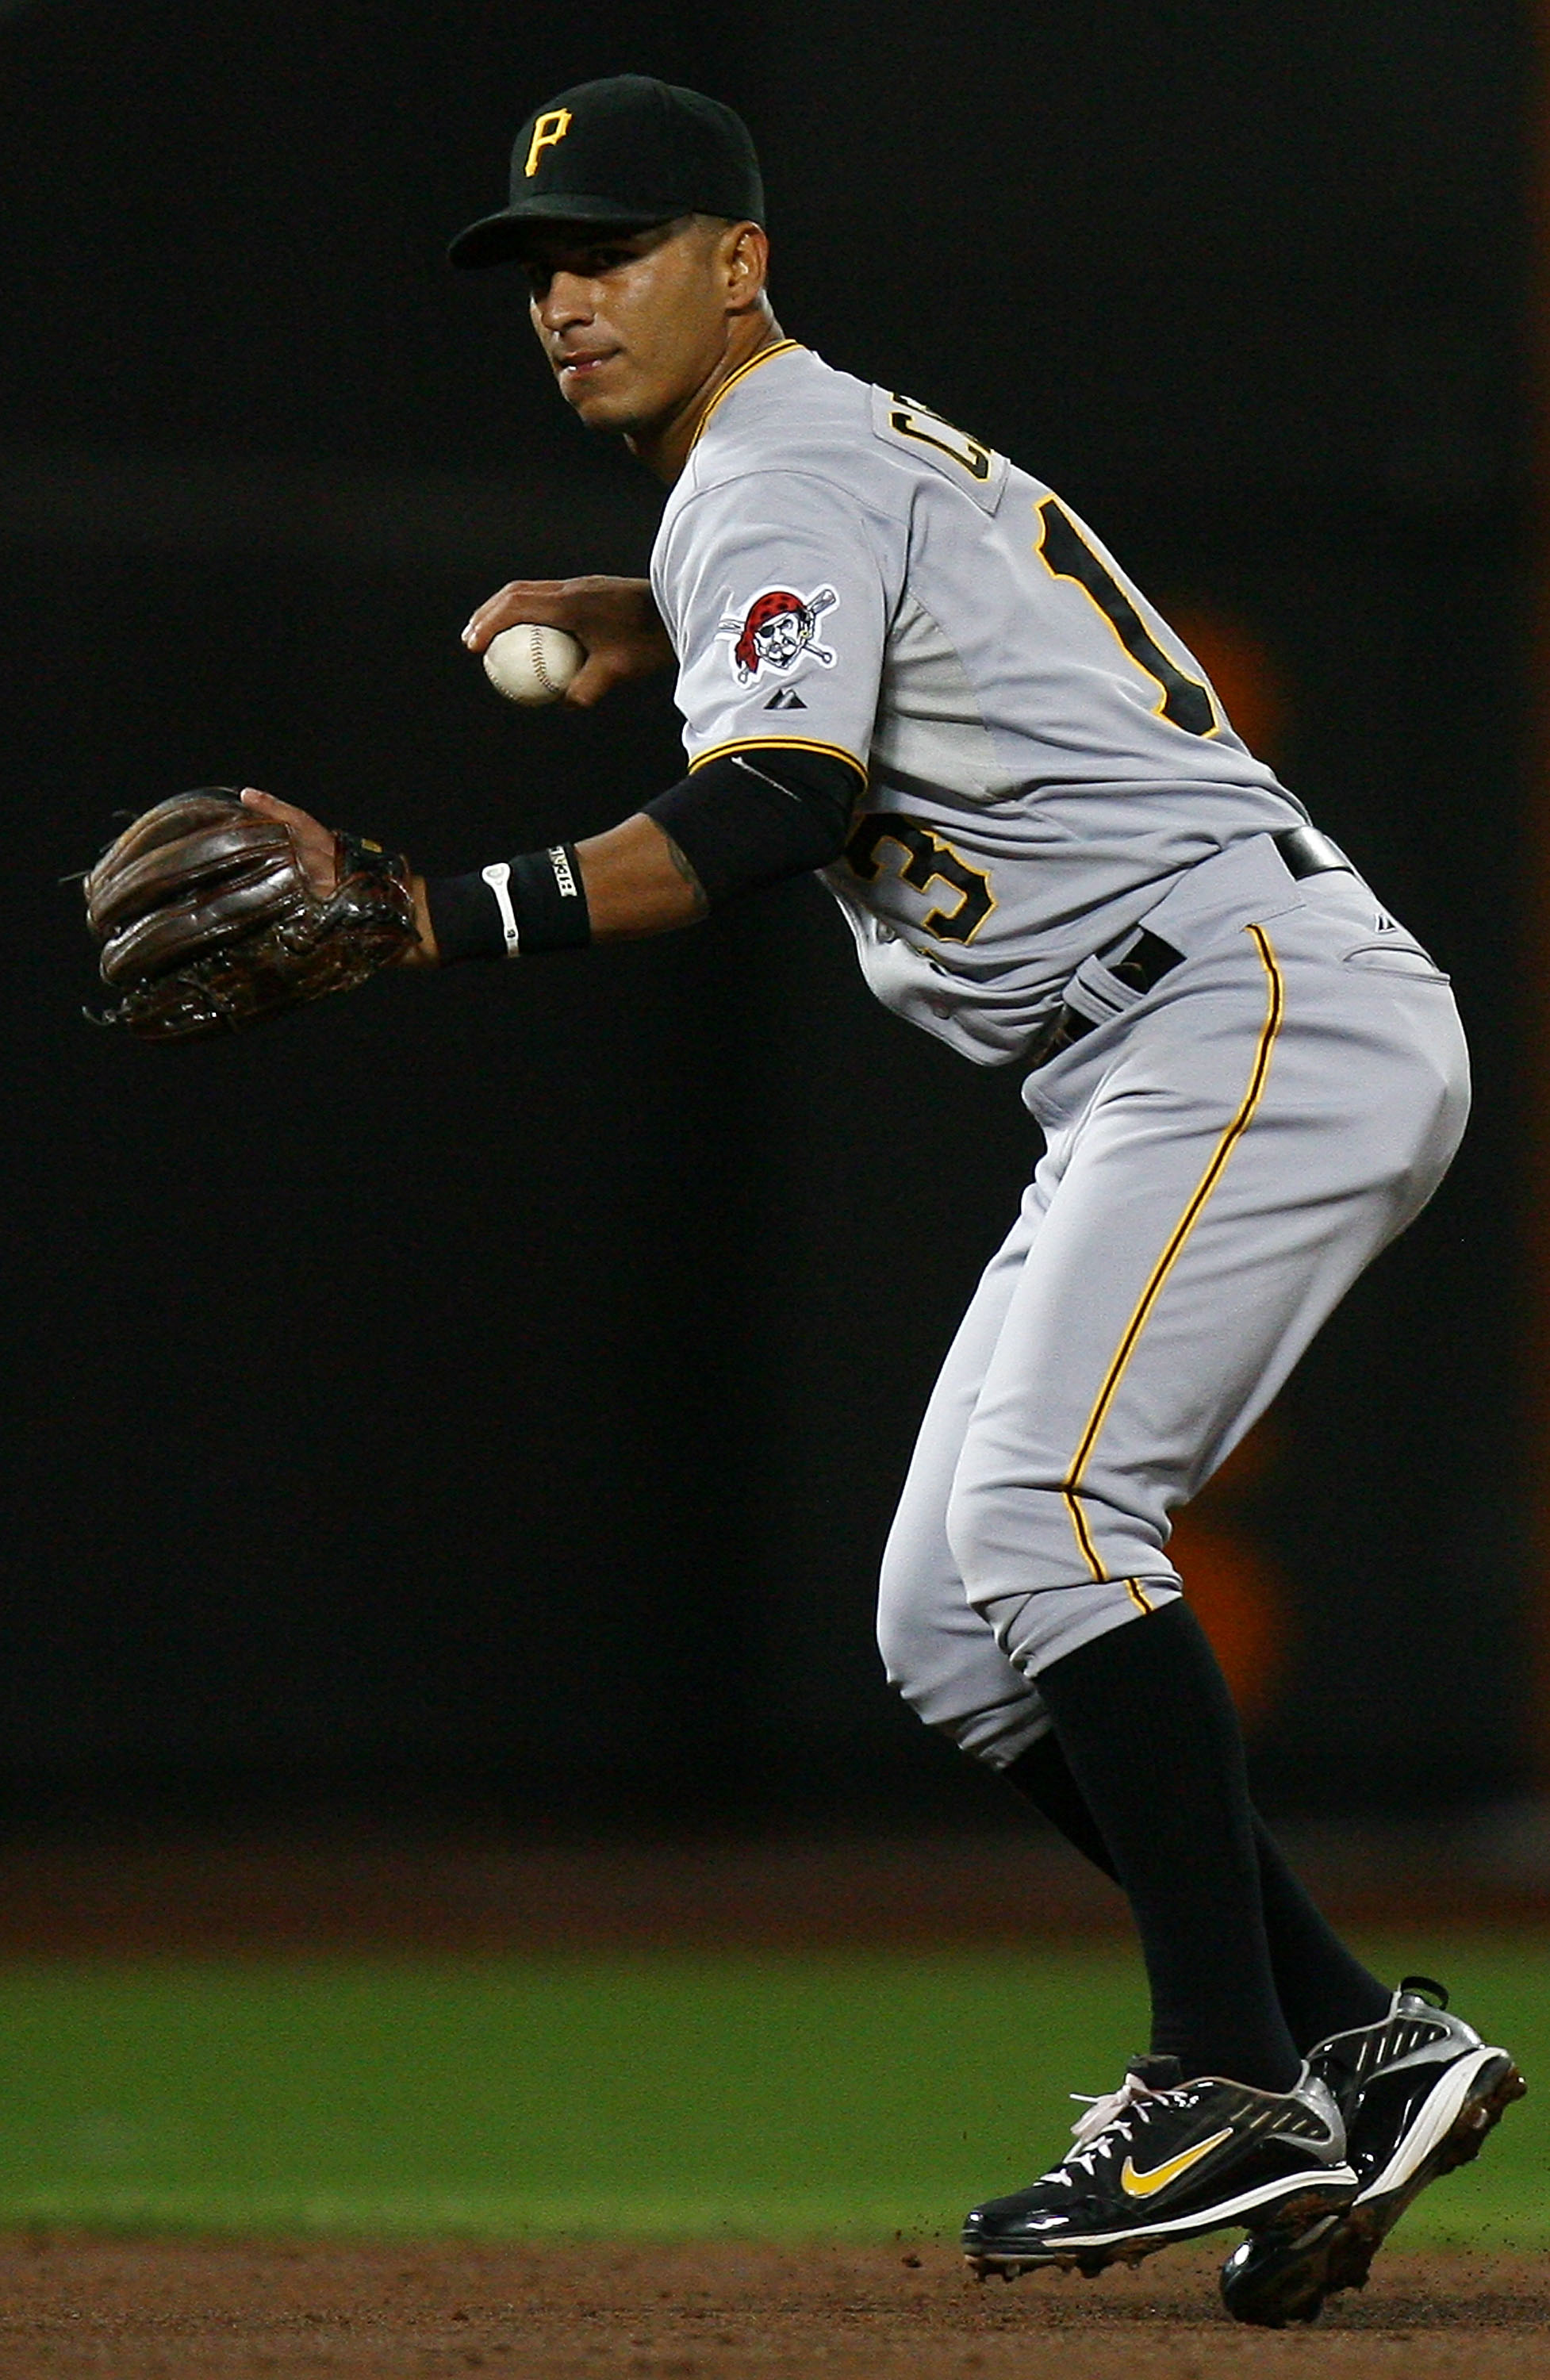 NEW YORK - SEPTEMBER 15:  Jose Tabata #31 of the Pittsburgh Pirates fields a ball against the New York Mets on September 15, 2010 at Citi Field in the Flushing neighborhood of the Queens borough of New York City.  (Photo by Andrew Burton/Getty Images)